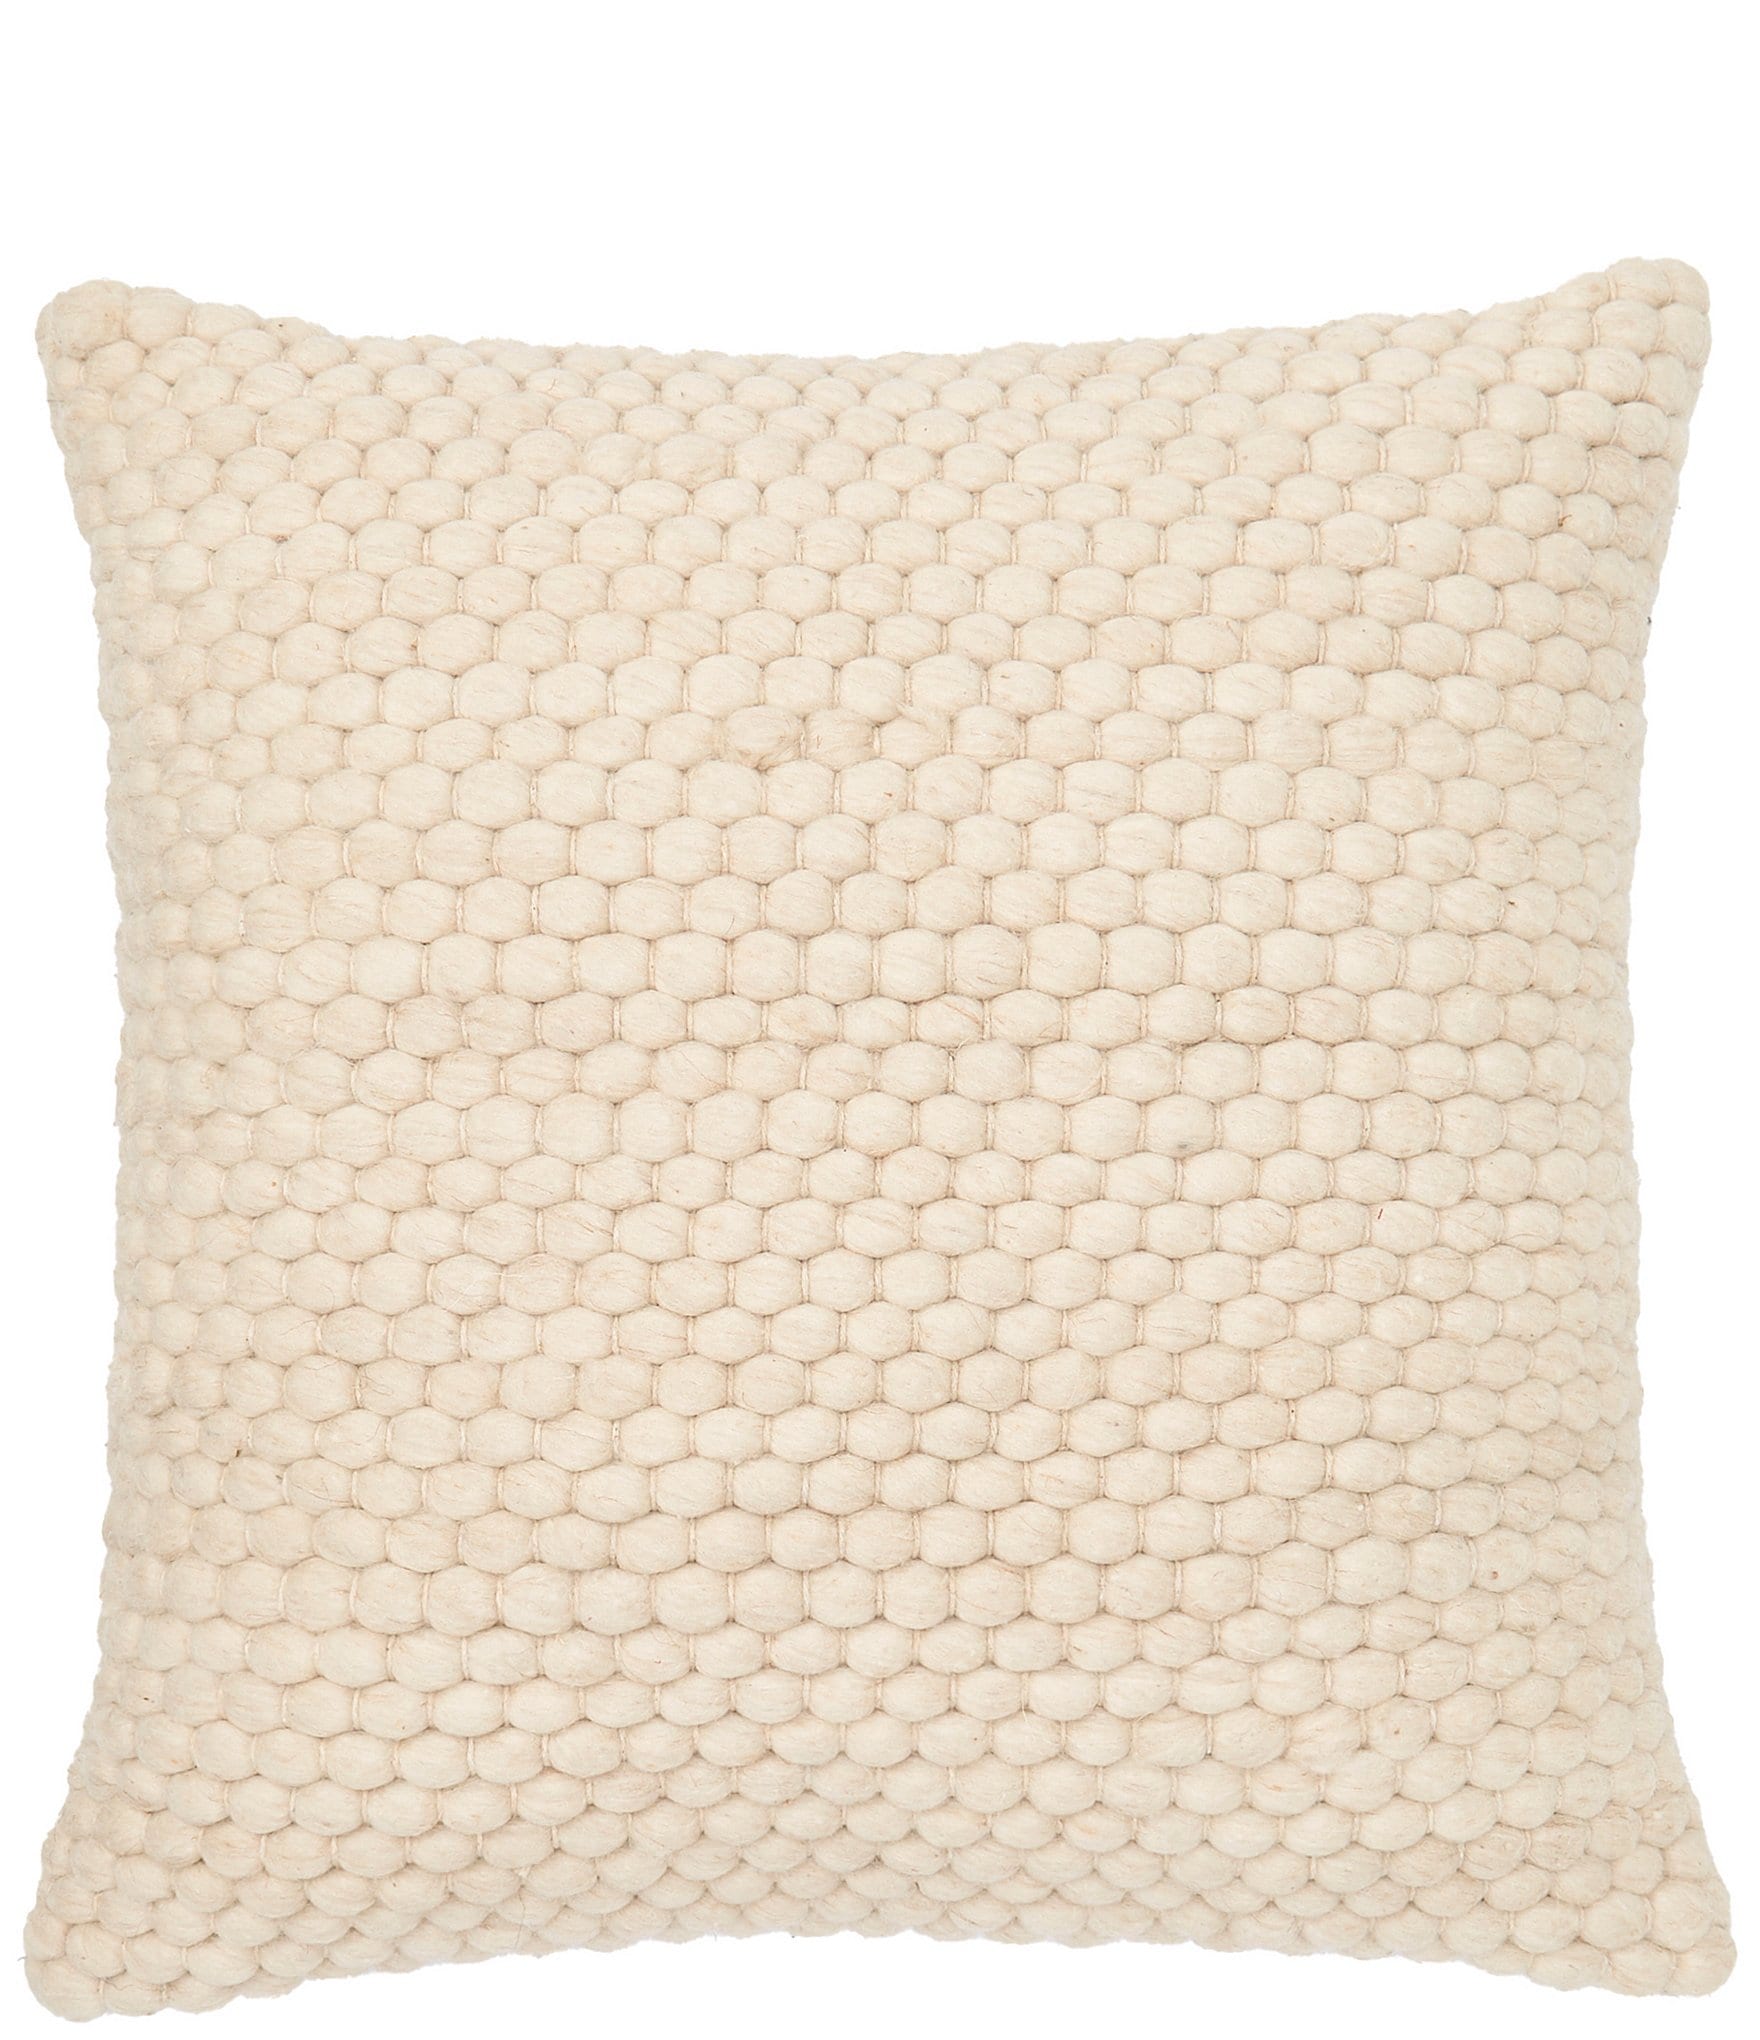 https://dimg.dillards.com/is/image/DillardsZoom/zoom/southern-living-simplicity-collection-french-knot-square-pillow/00000000_zi_3c1954a5-4a70-42b6-adff-f75738b037cc.jpg